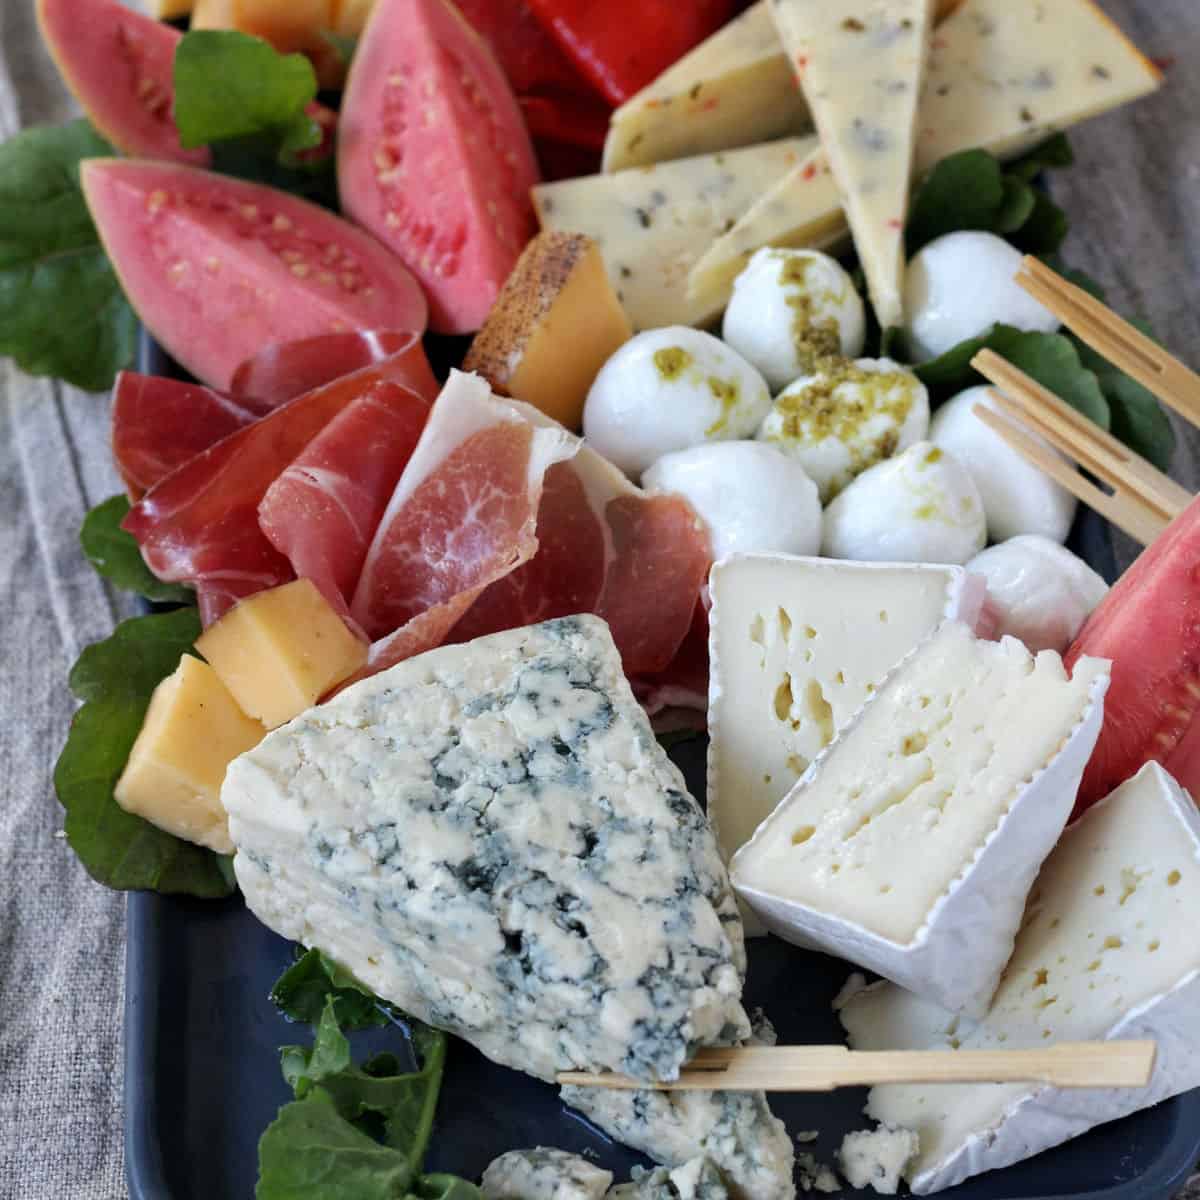 Best Condiments for a Charcuterie Board